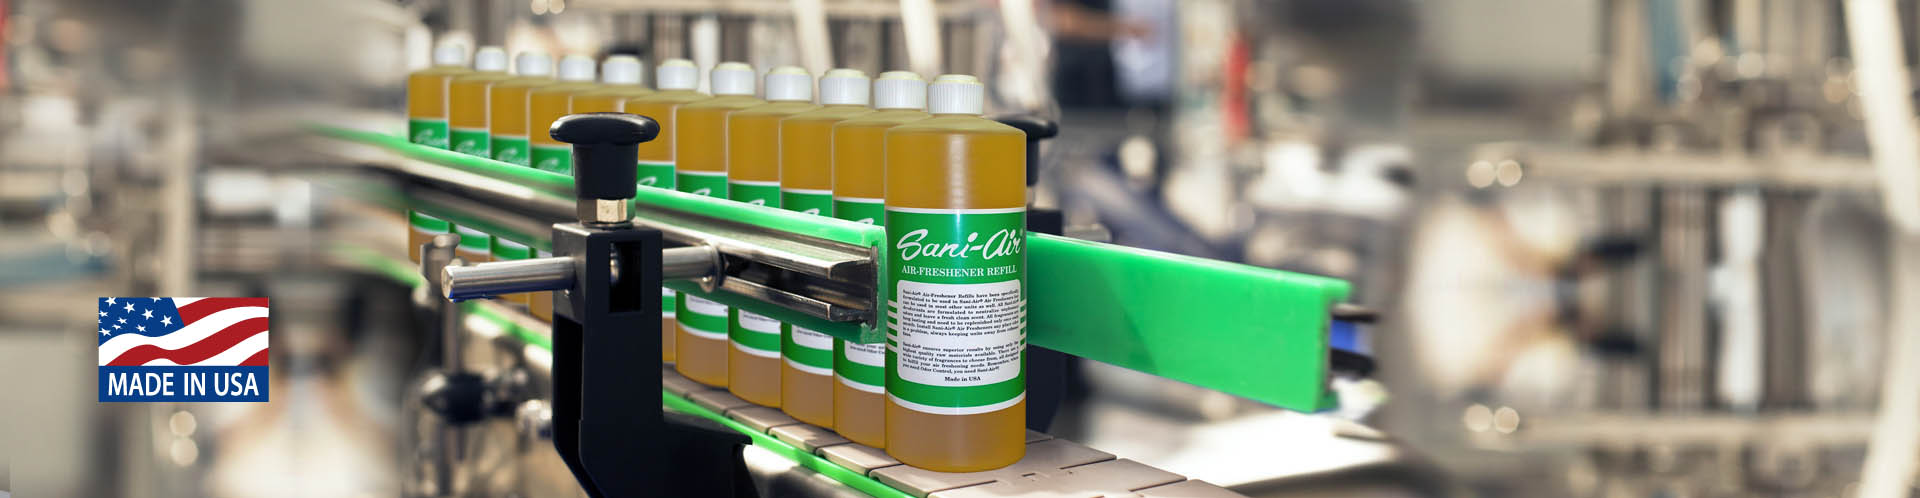 Why Choose Sani-Air As Your Air Freshener Supply Company?